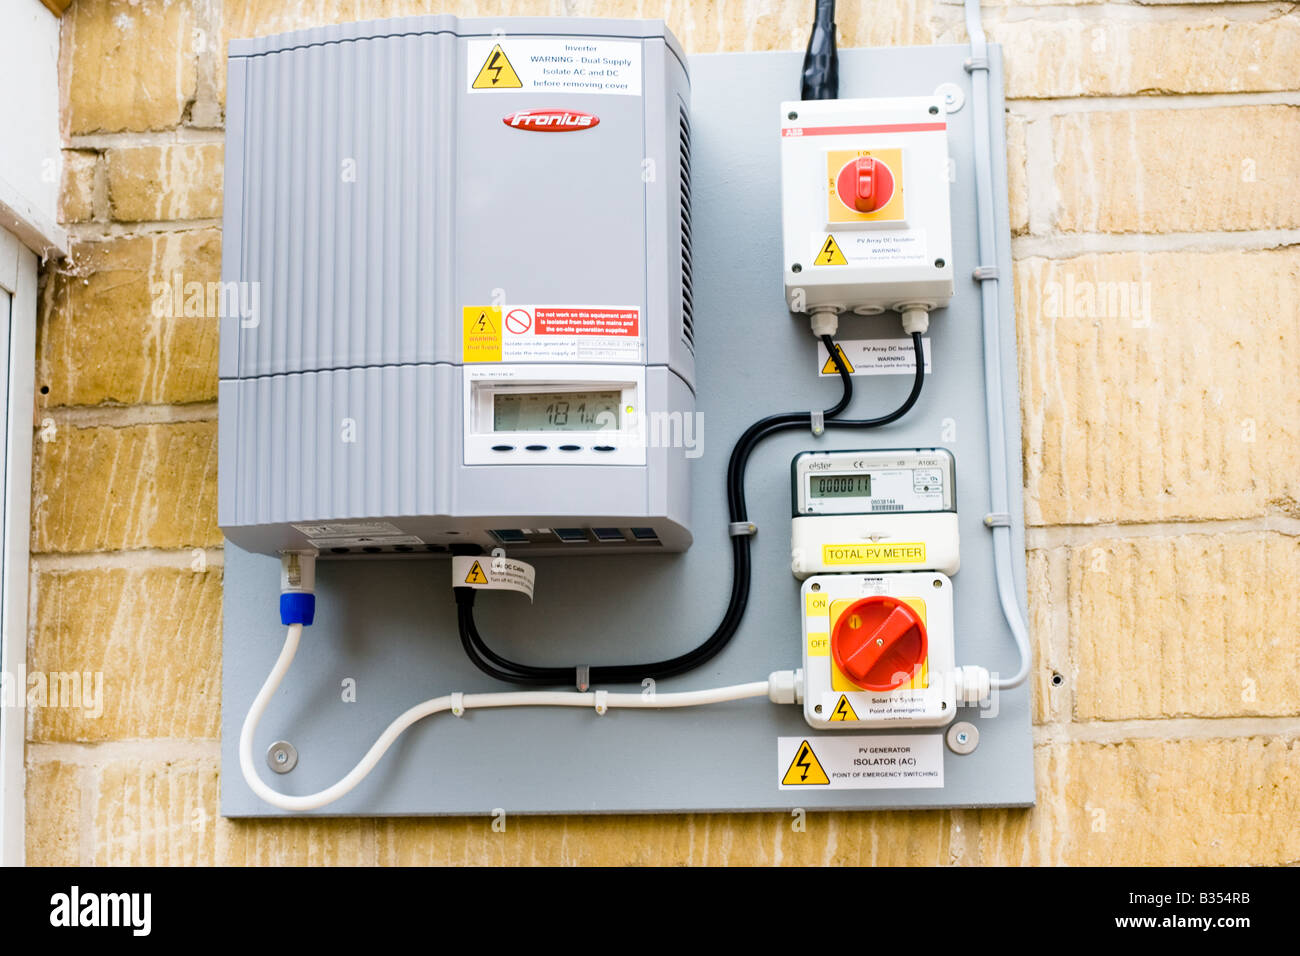 Wall mounted Fronius inverter to control array of 12 solar PV panels Cotswolds UK Stock Photo